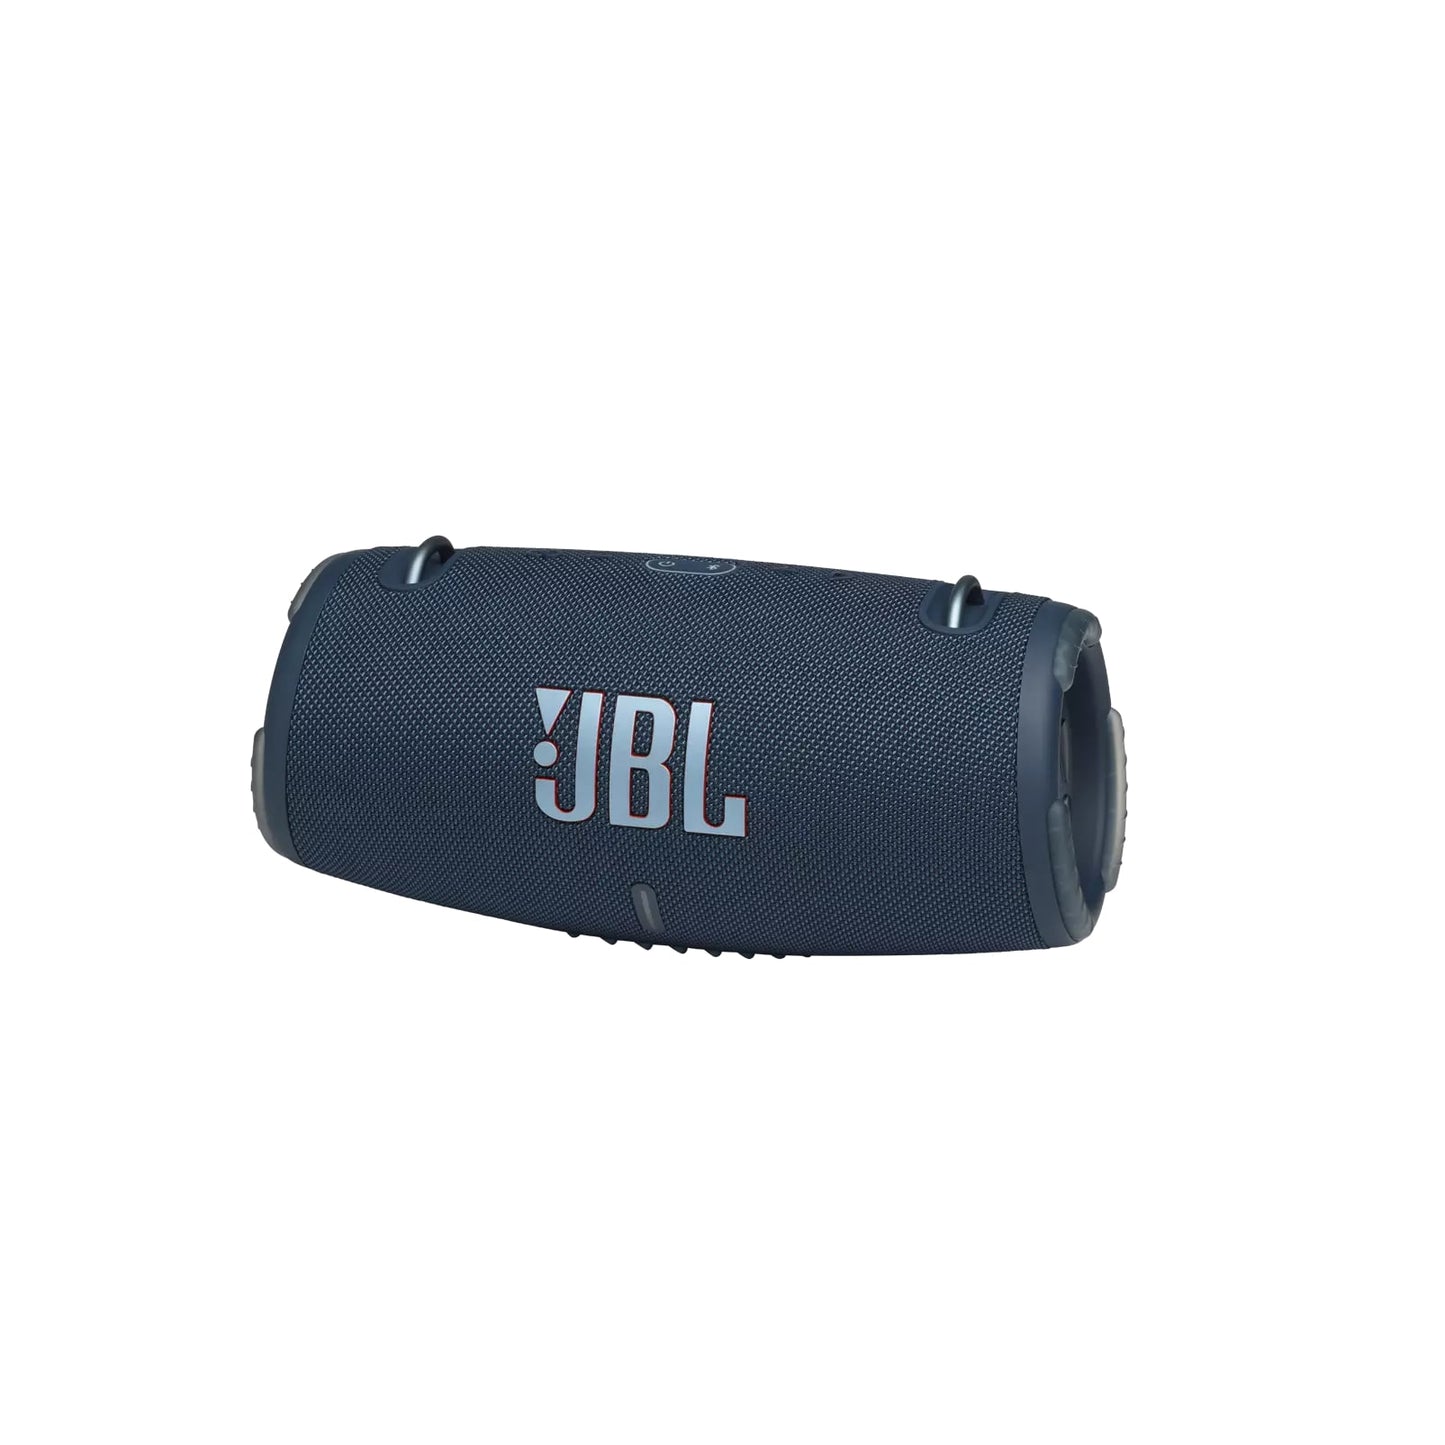 JBL Xtreme 3 Wireless Bluetooth Speaker with 15Hr Playtime, PartyBoost Function, IP67 Waterproof Rating, Built-In Powerbank and Included Carrying Strap for Outdoor Travel (Black, Camouflage, Blue)